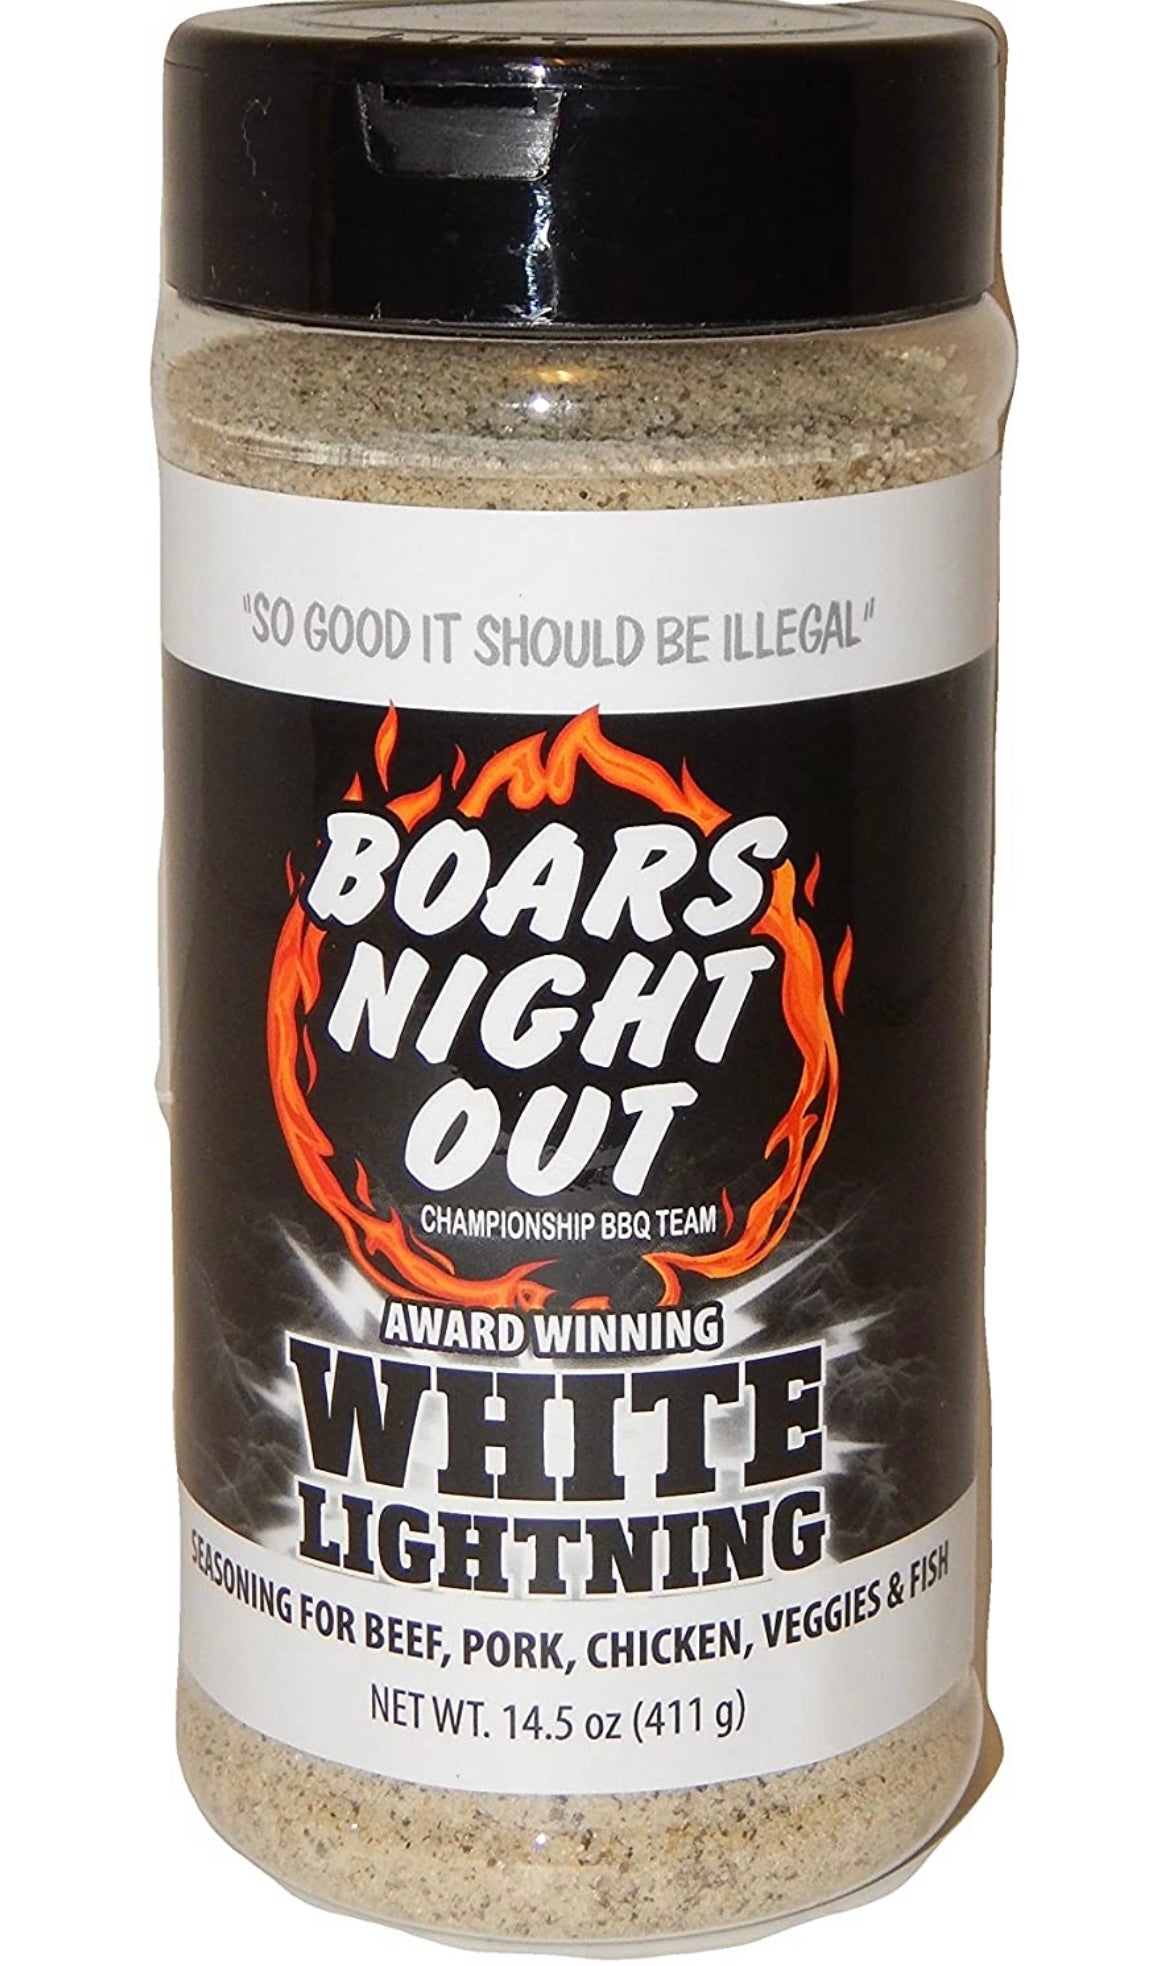 Double Garlic Butter White Lightning 346g by Boars Night Out